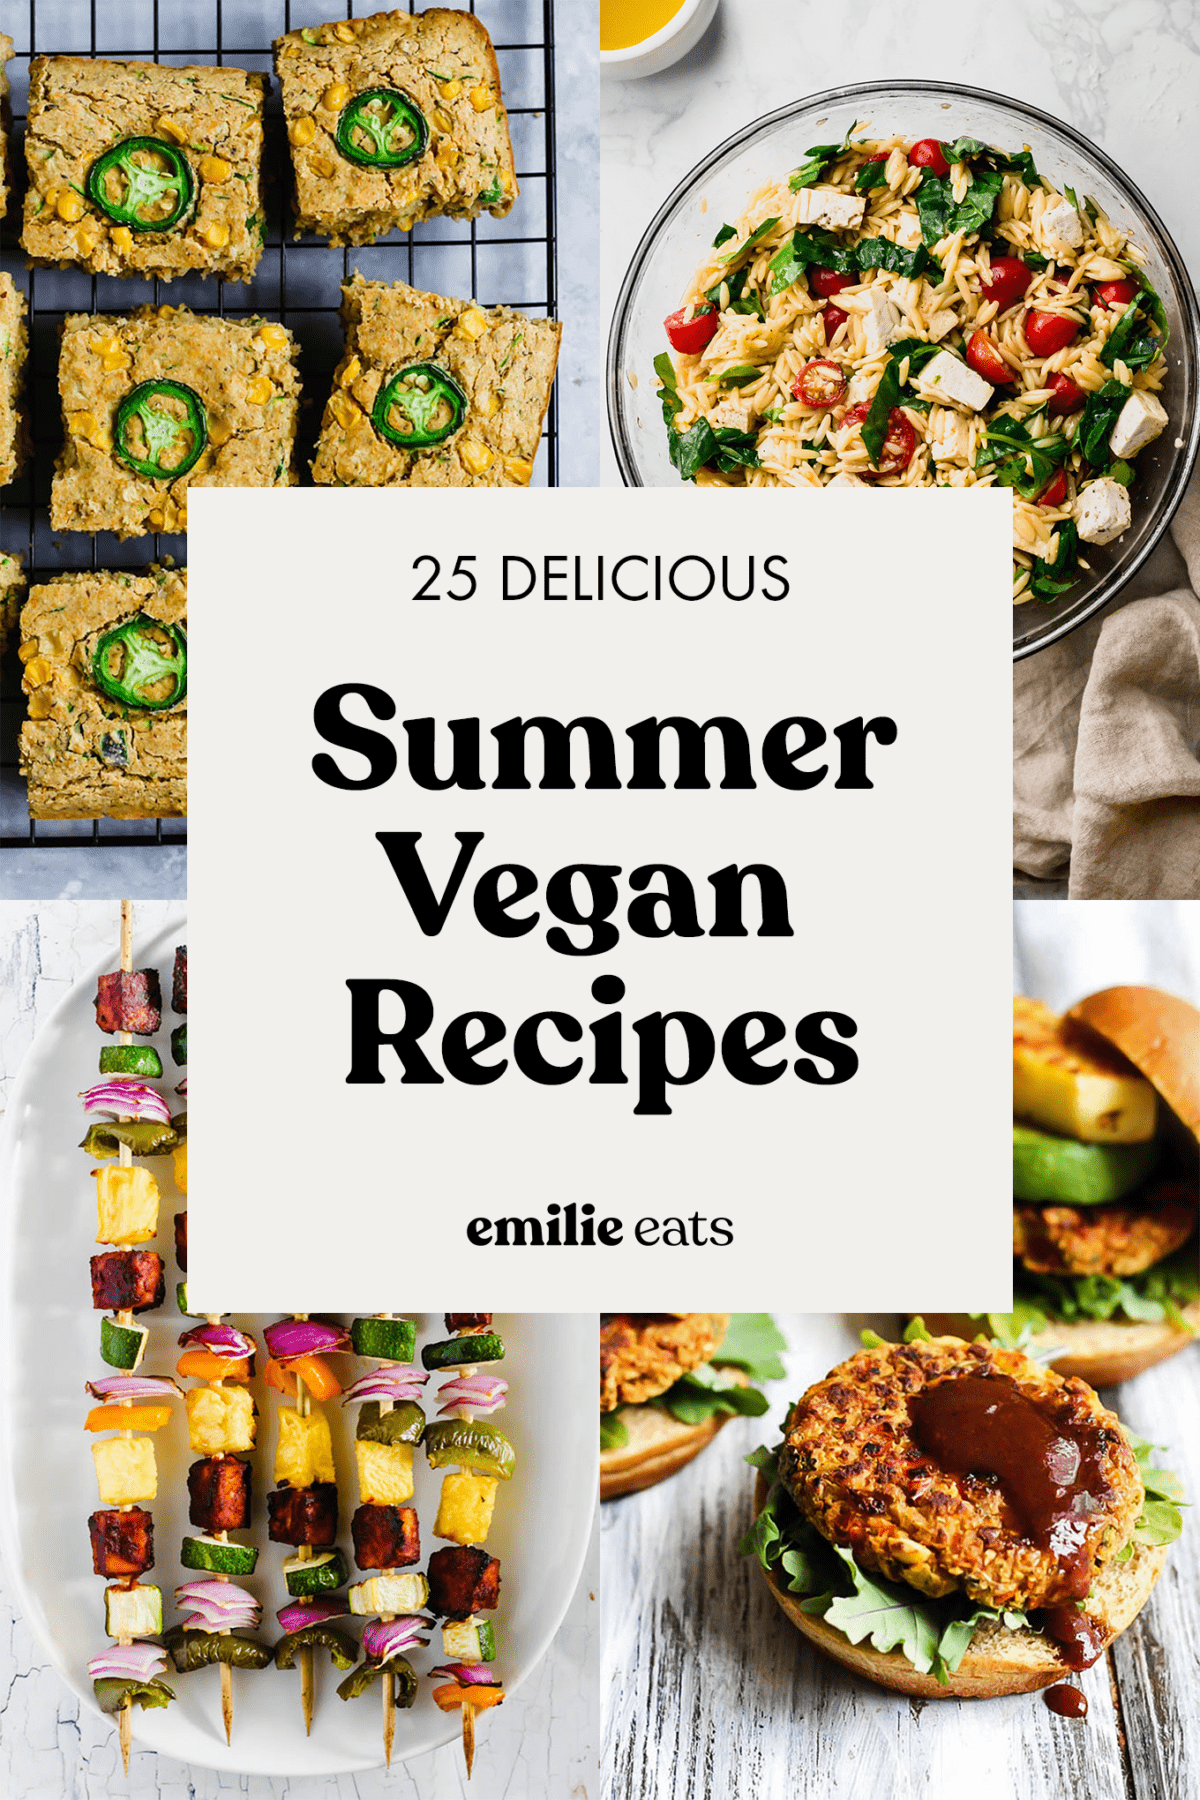 25 Vegan Summer Recipes for Cookouts and Barbecues – Emilie Eats